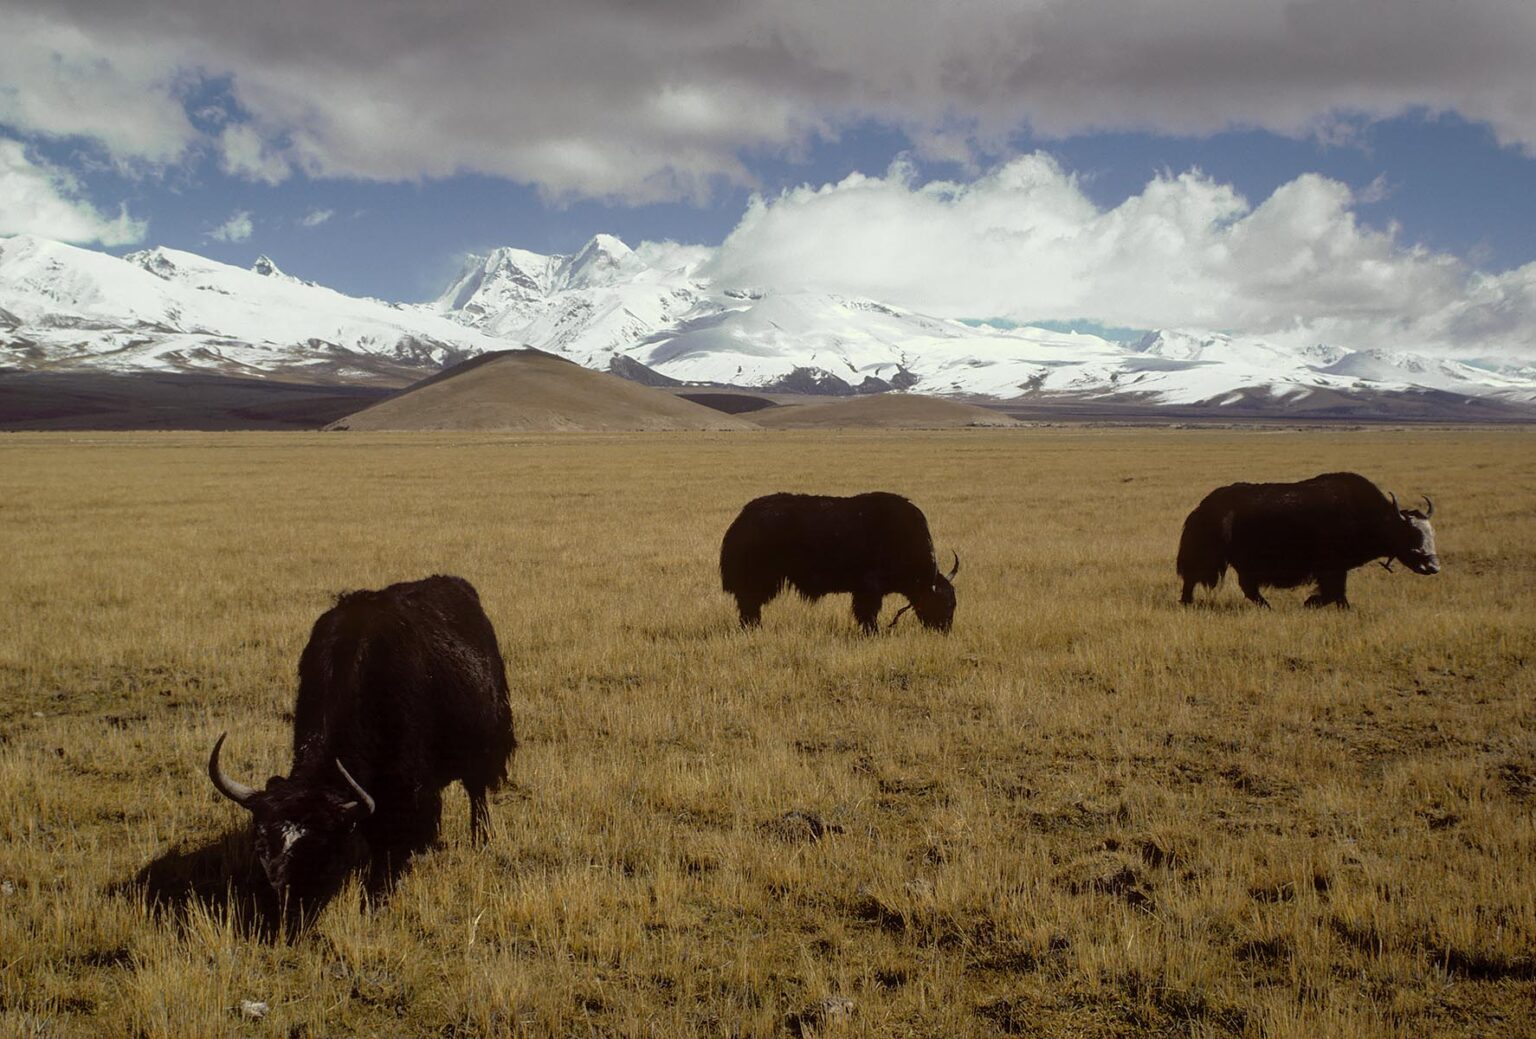 Yaks and the majestic Himalaya - Quinghai route north of Lhasa, Tibet.